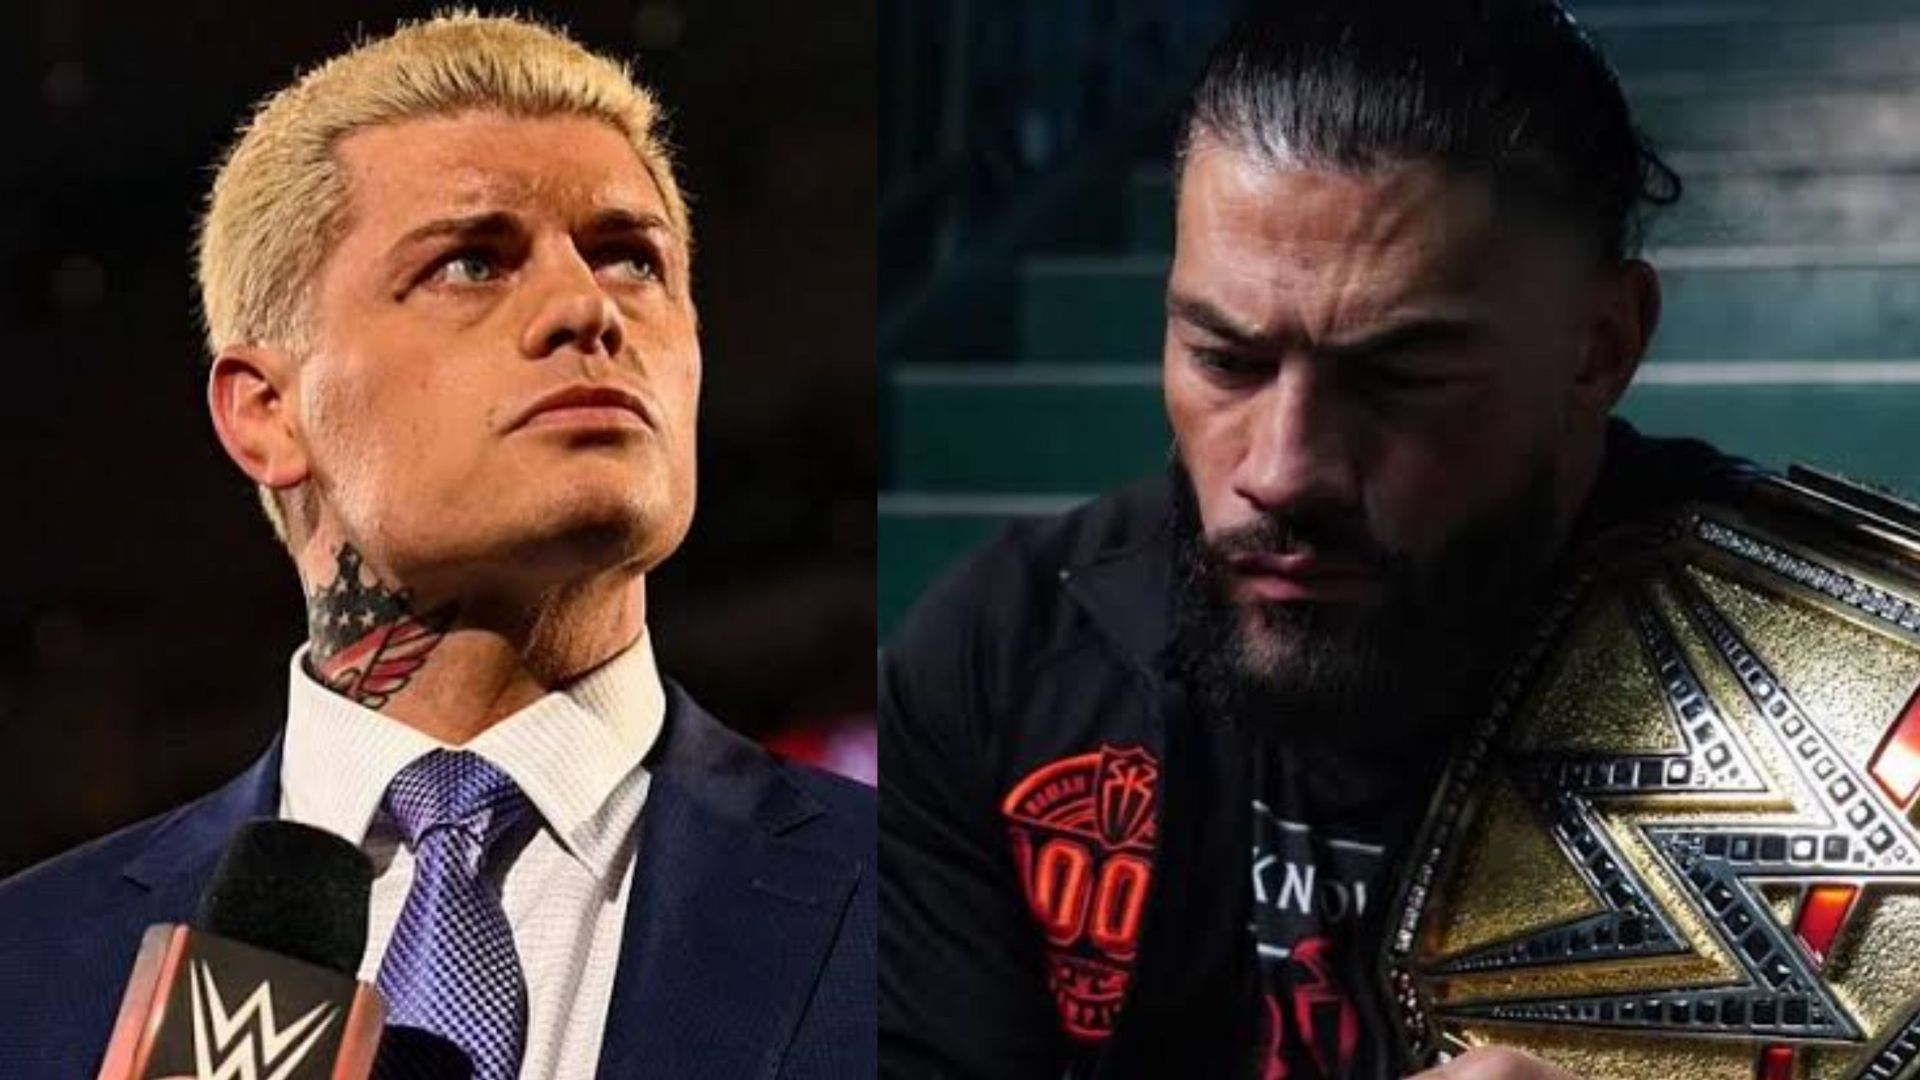 Roman Reigns has bested Cody Rhodes once